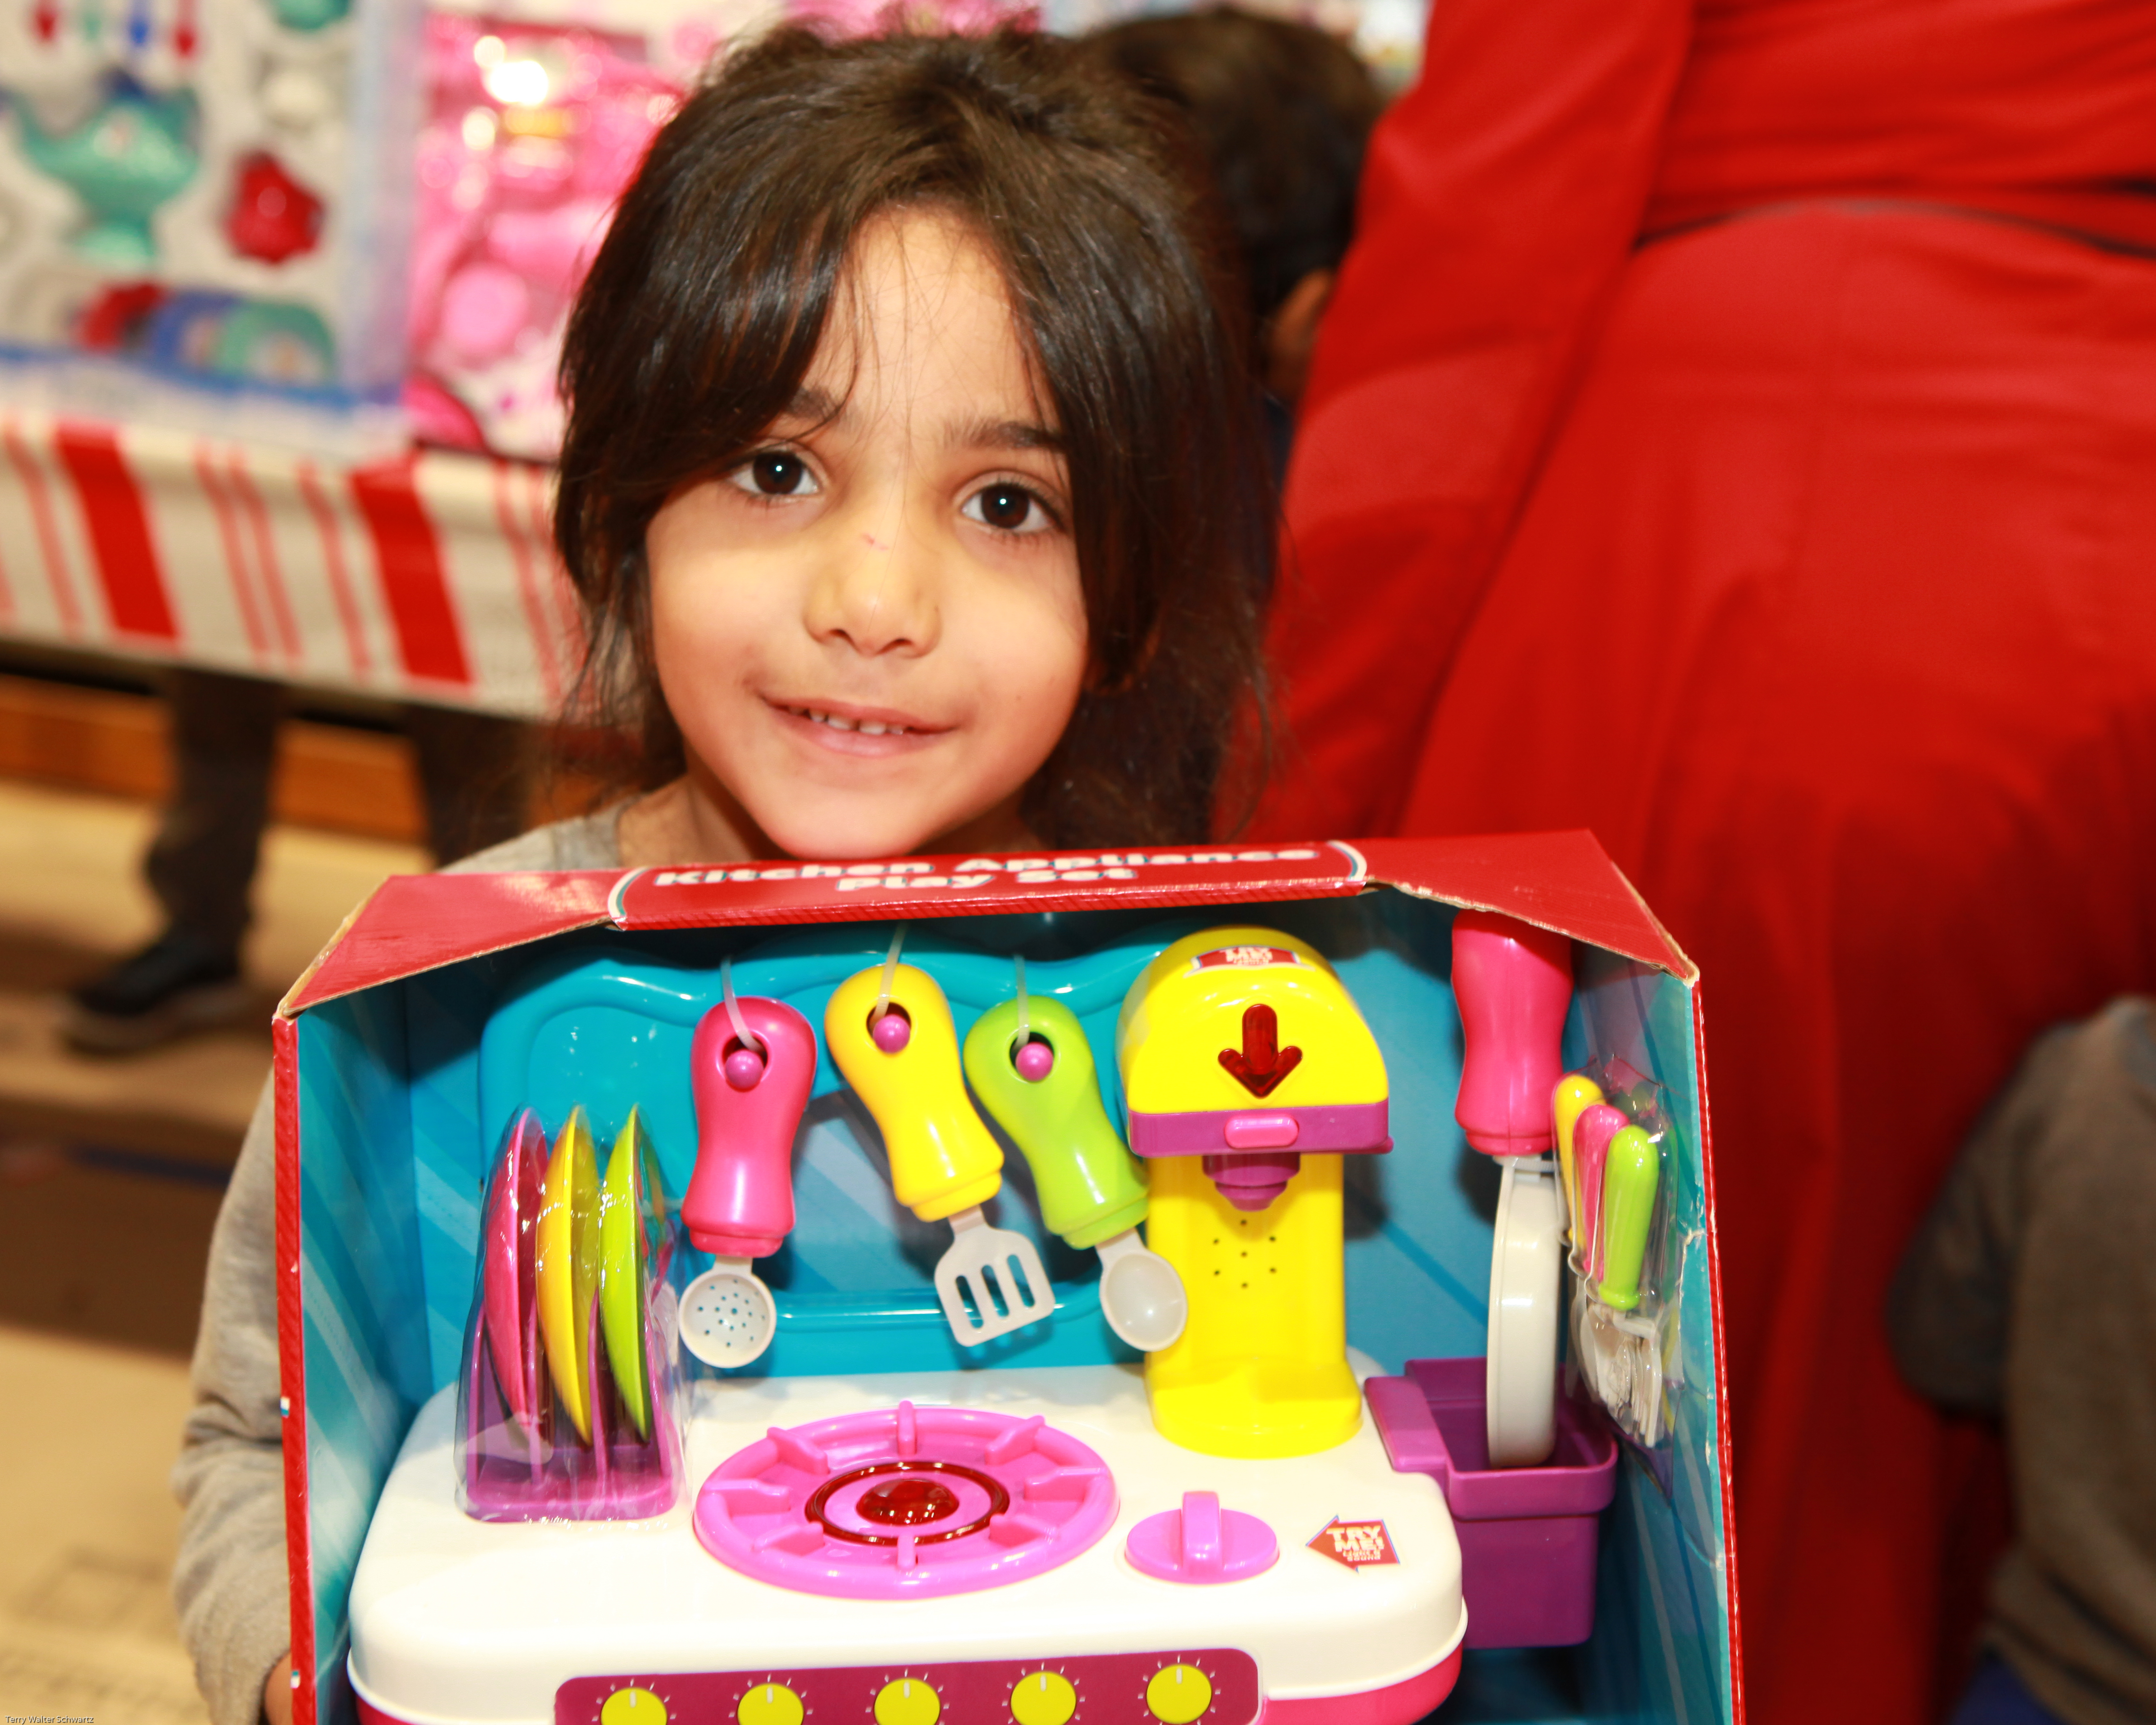 Smiling girl holding a toy cooking set